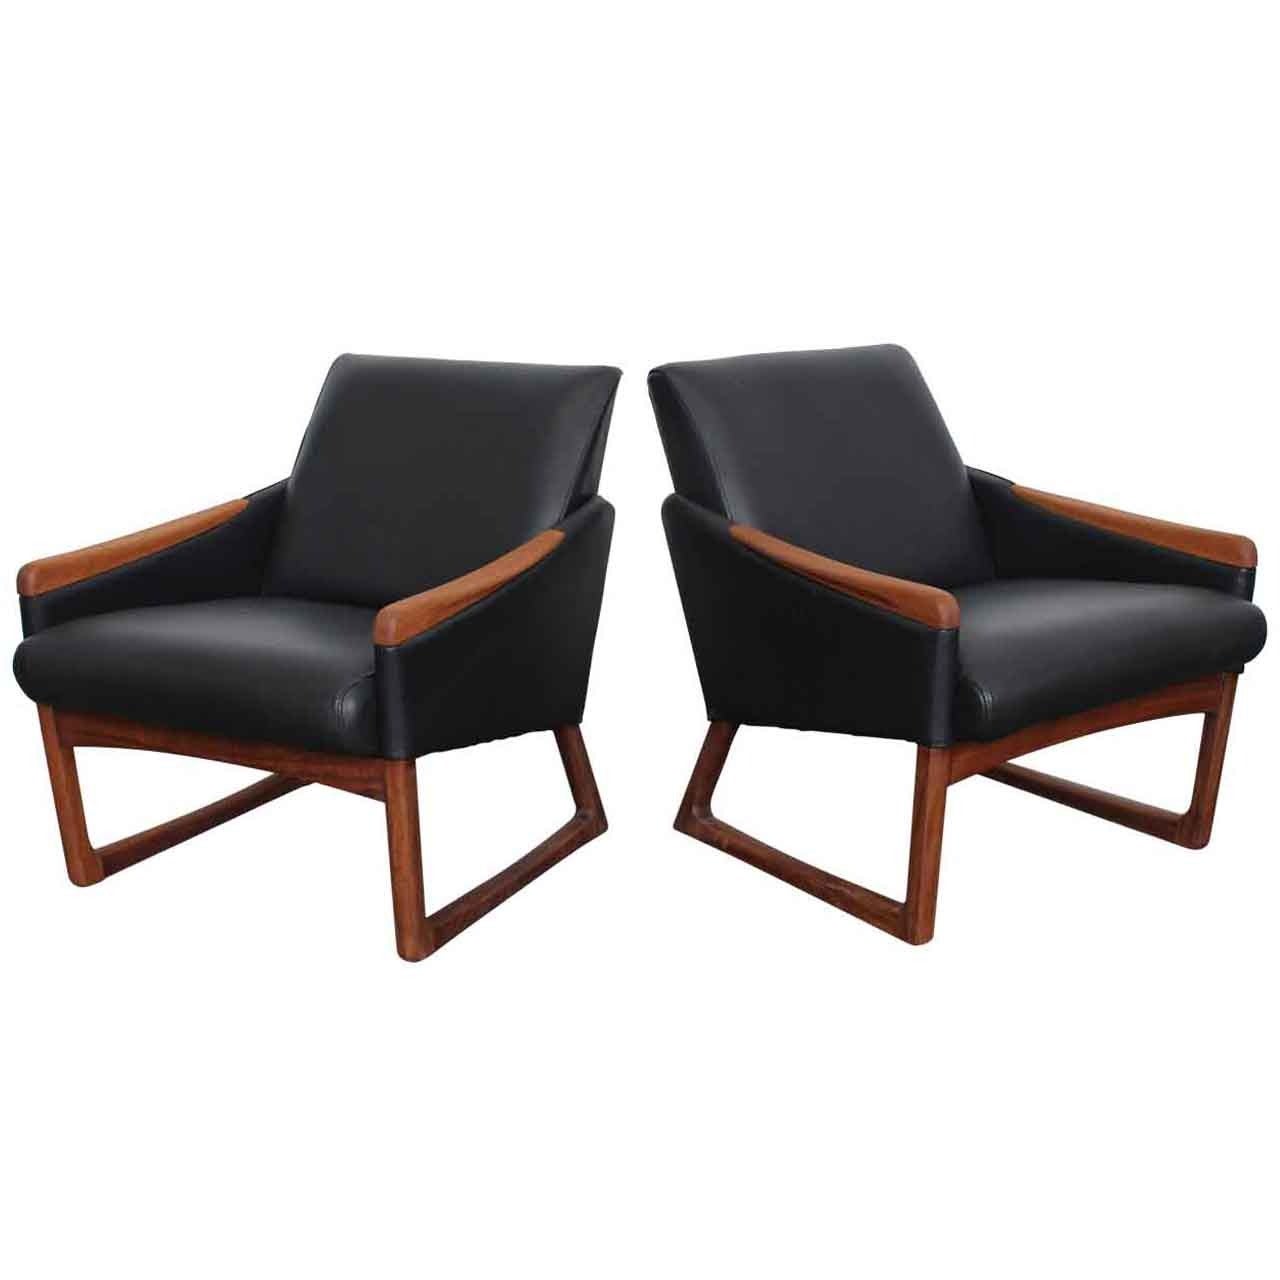 Mid-Century Modern Leather Lounge Chairs